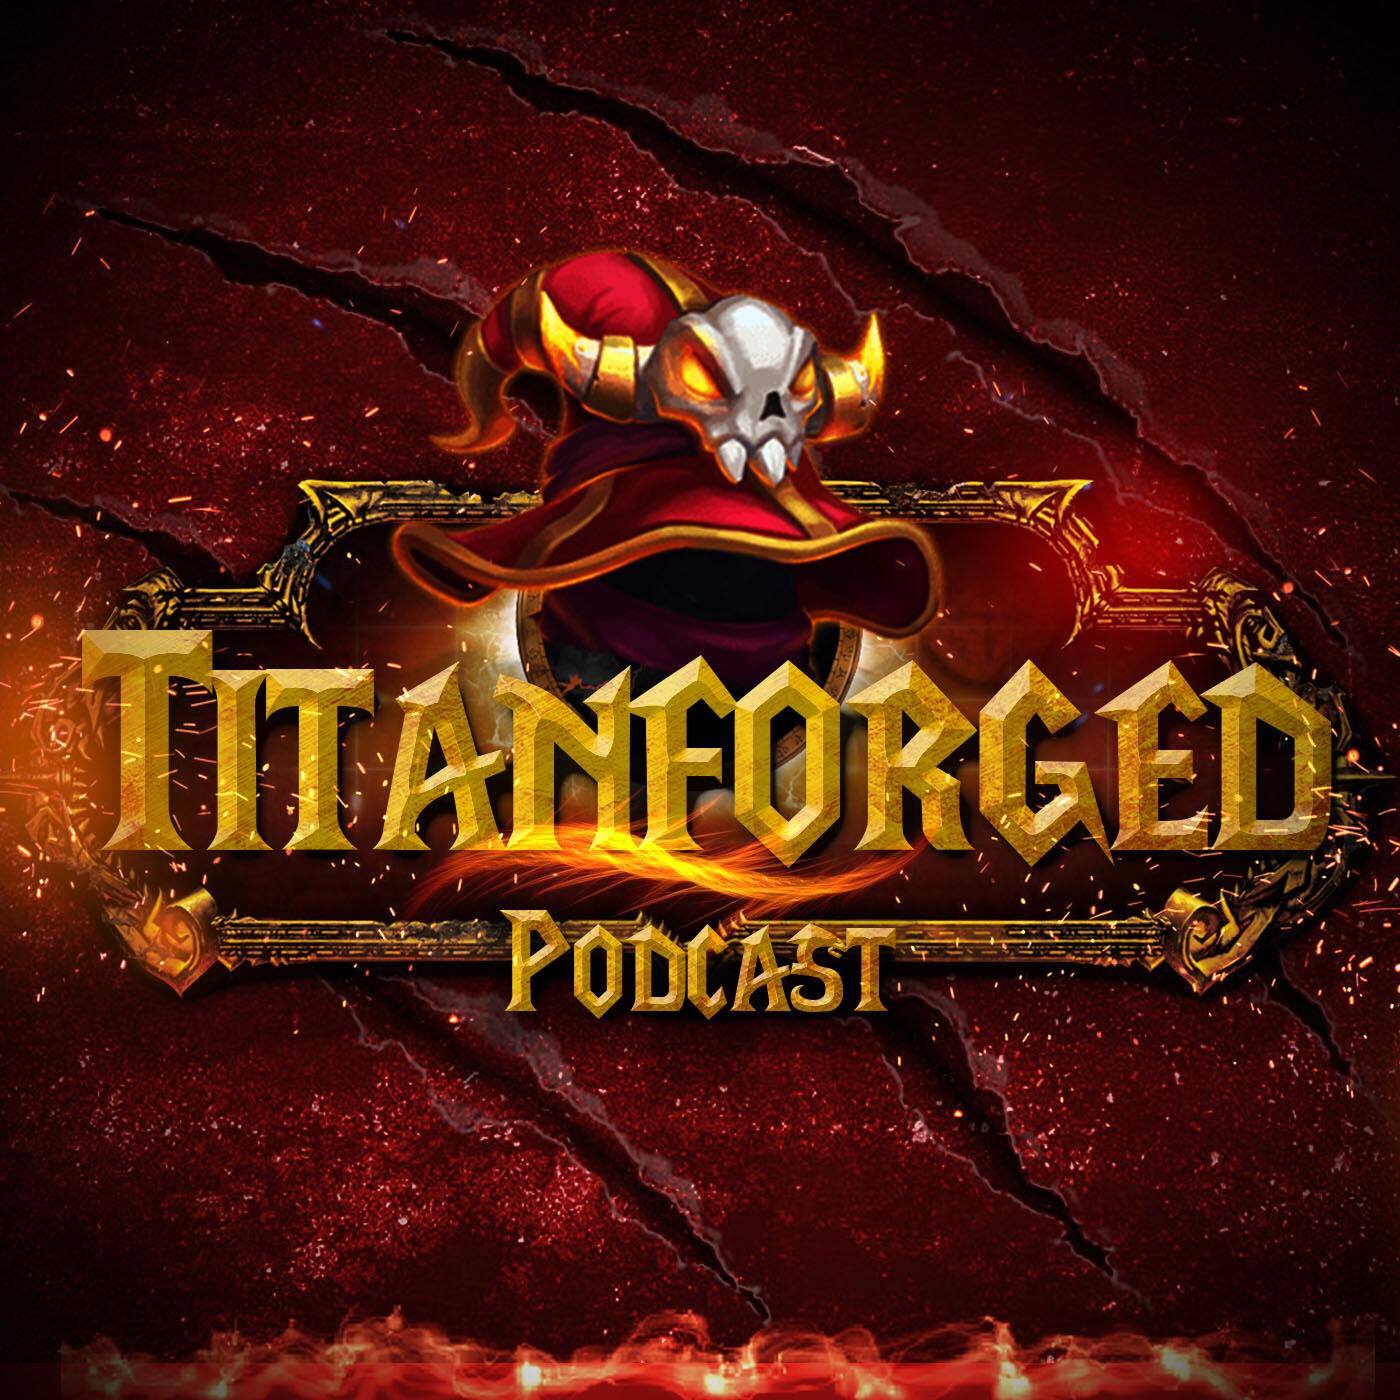 Titanforged Podcast Episode 5: Trivial WoW